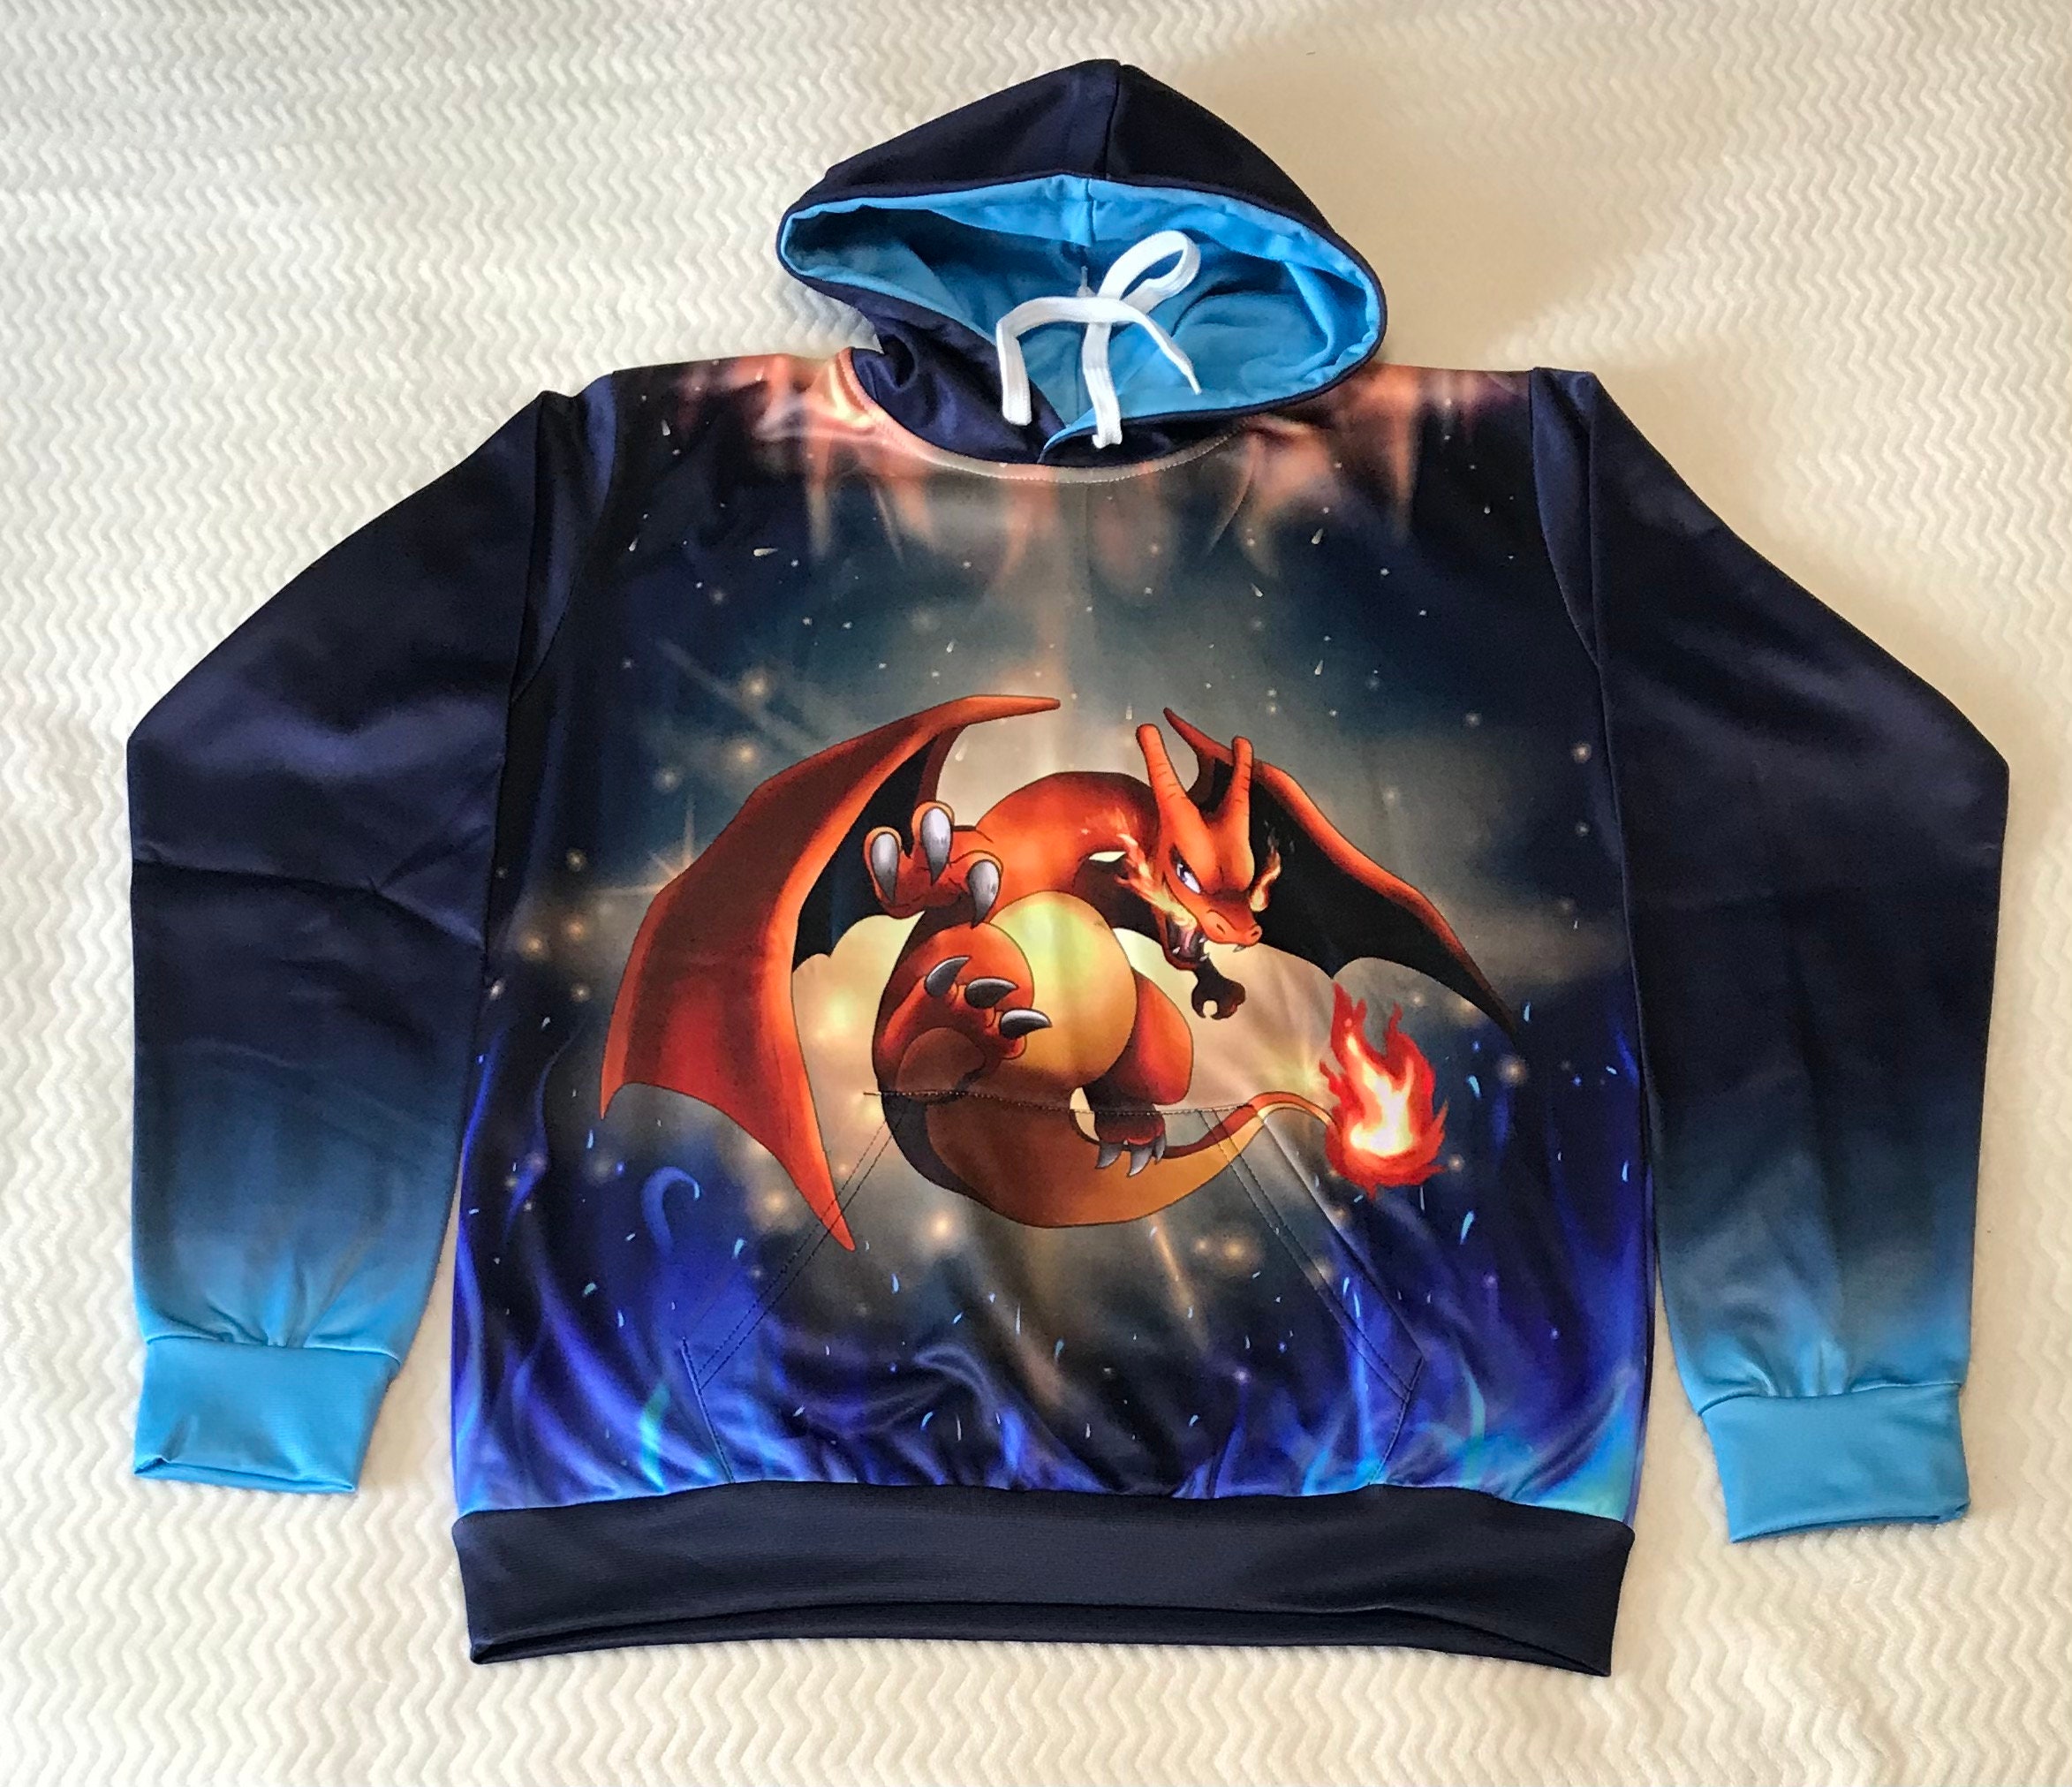 Charizard Cool Fire Anime Go Hooded Sweater Pullover Hoodie Sweatshirt Mens Tops